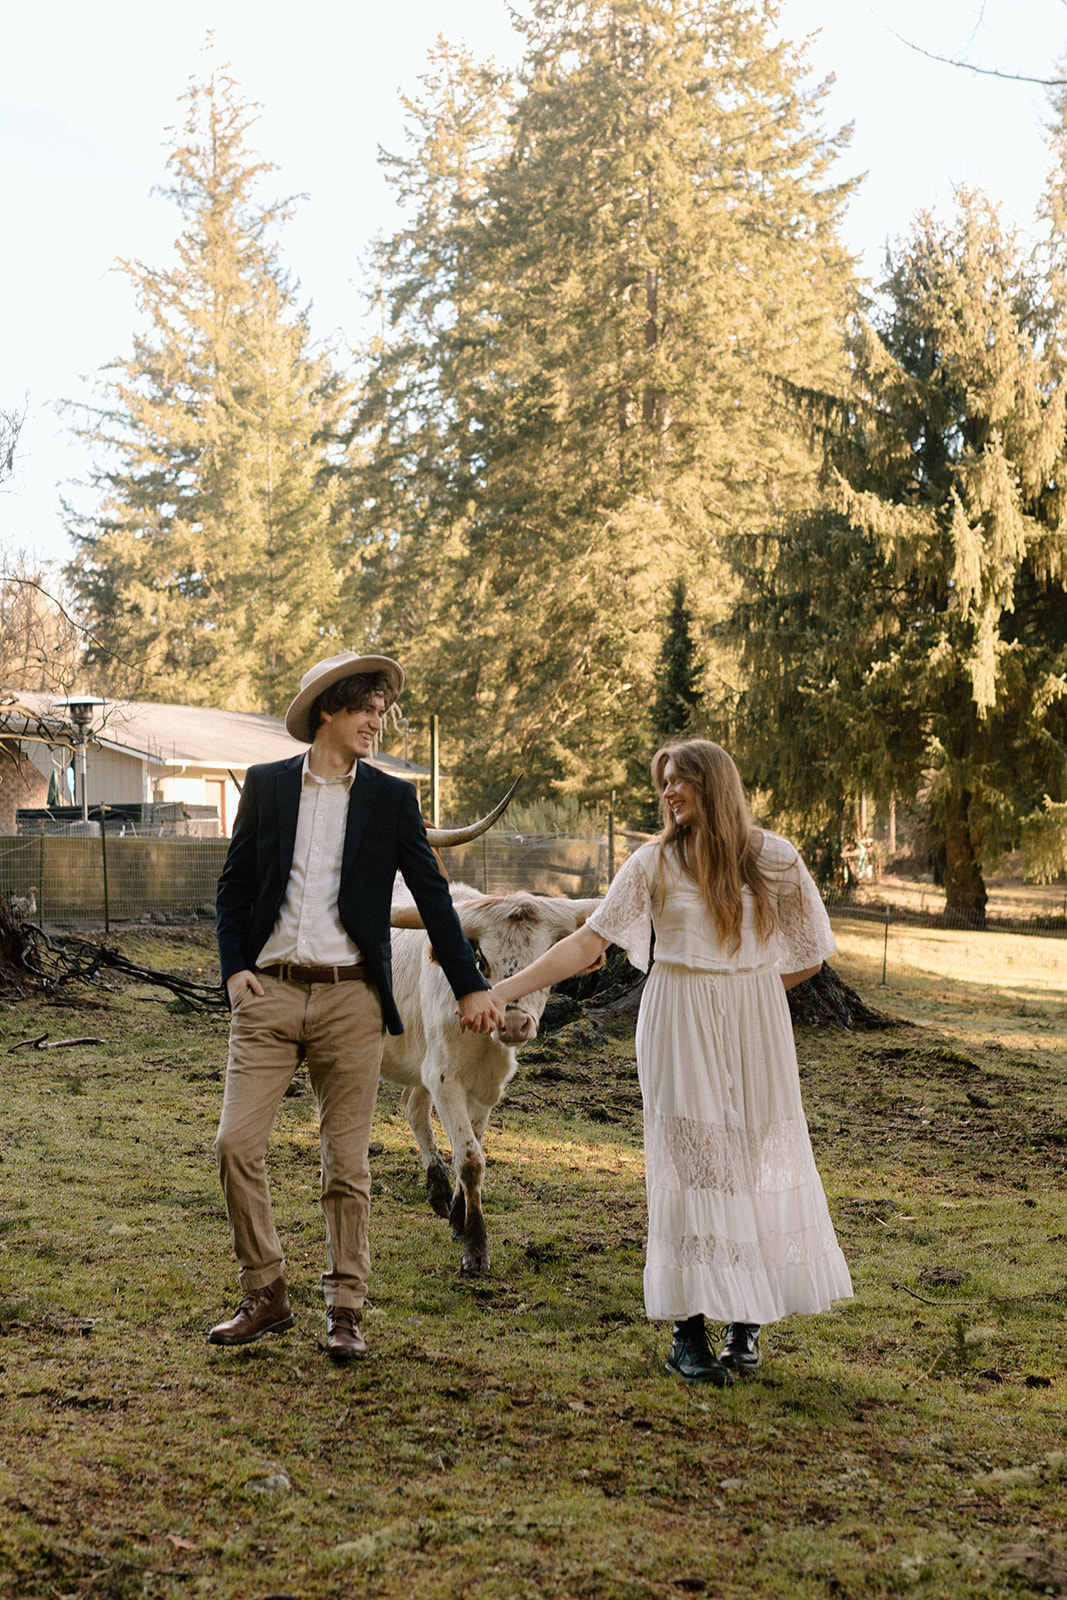 Couple running through open field with cows for their PNW Engagement Photos